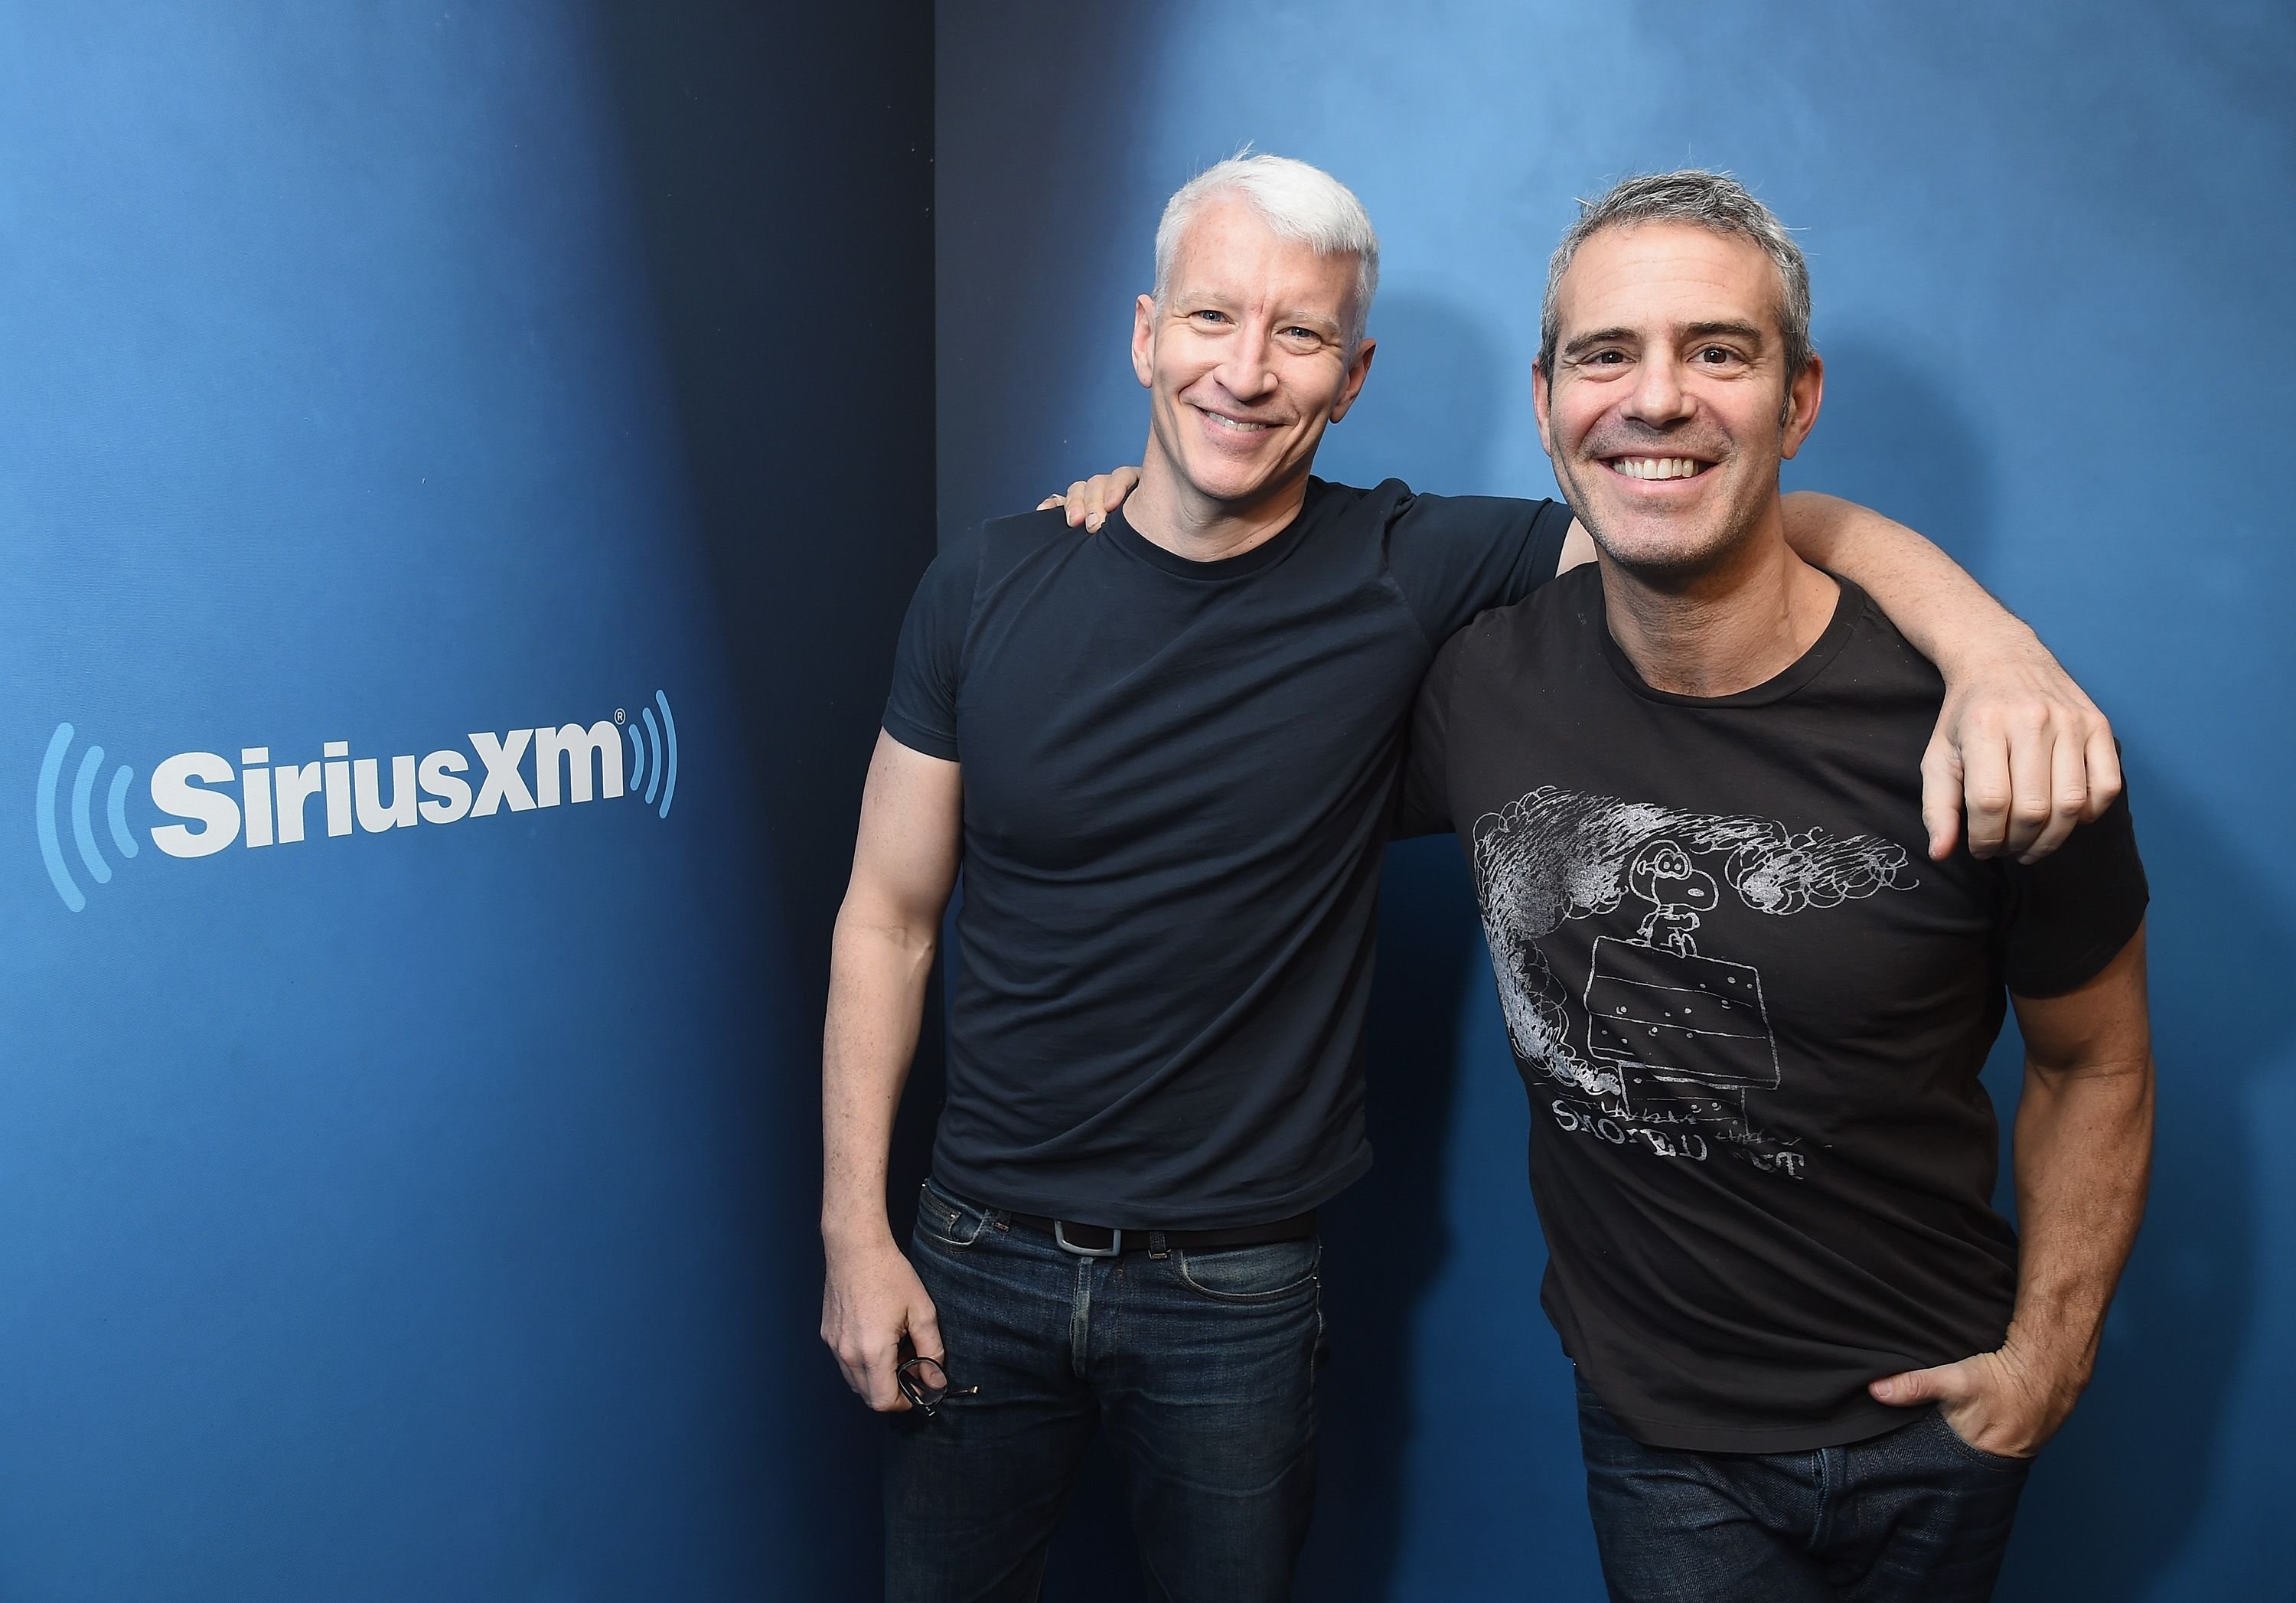 Anderson Cooper and Andy Cohen at SiriusXM Studios on January 13, 2017 | Photo: Getty Images